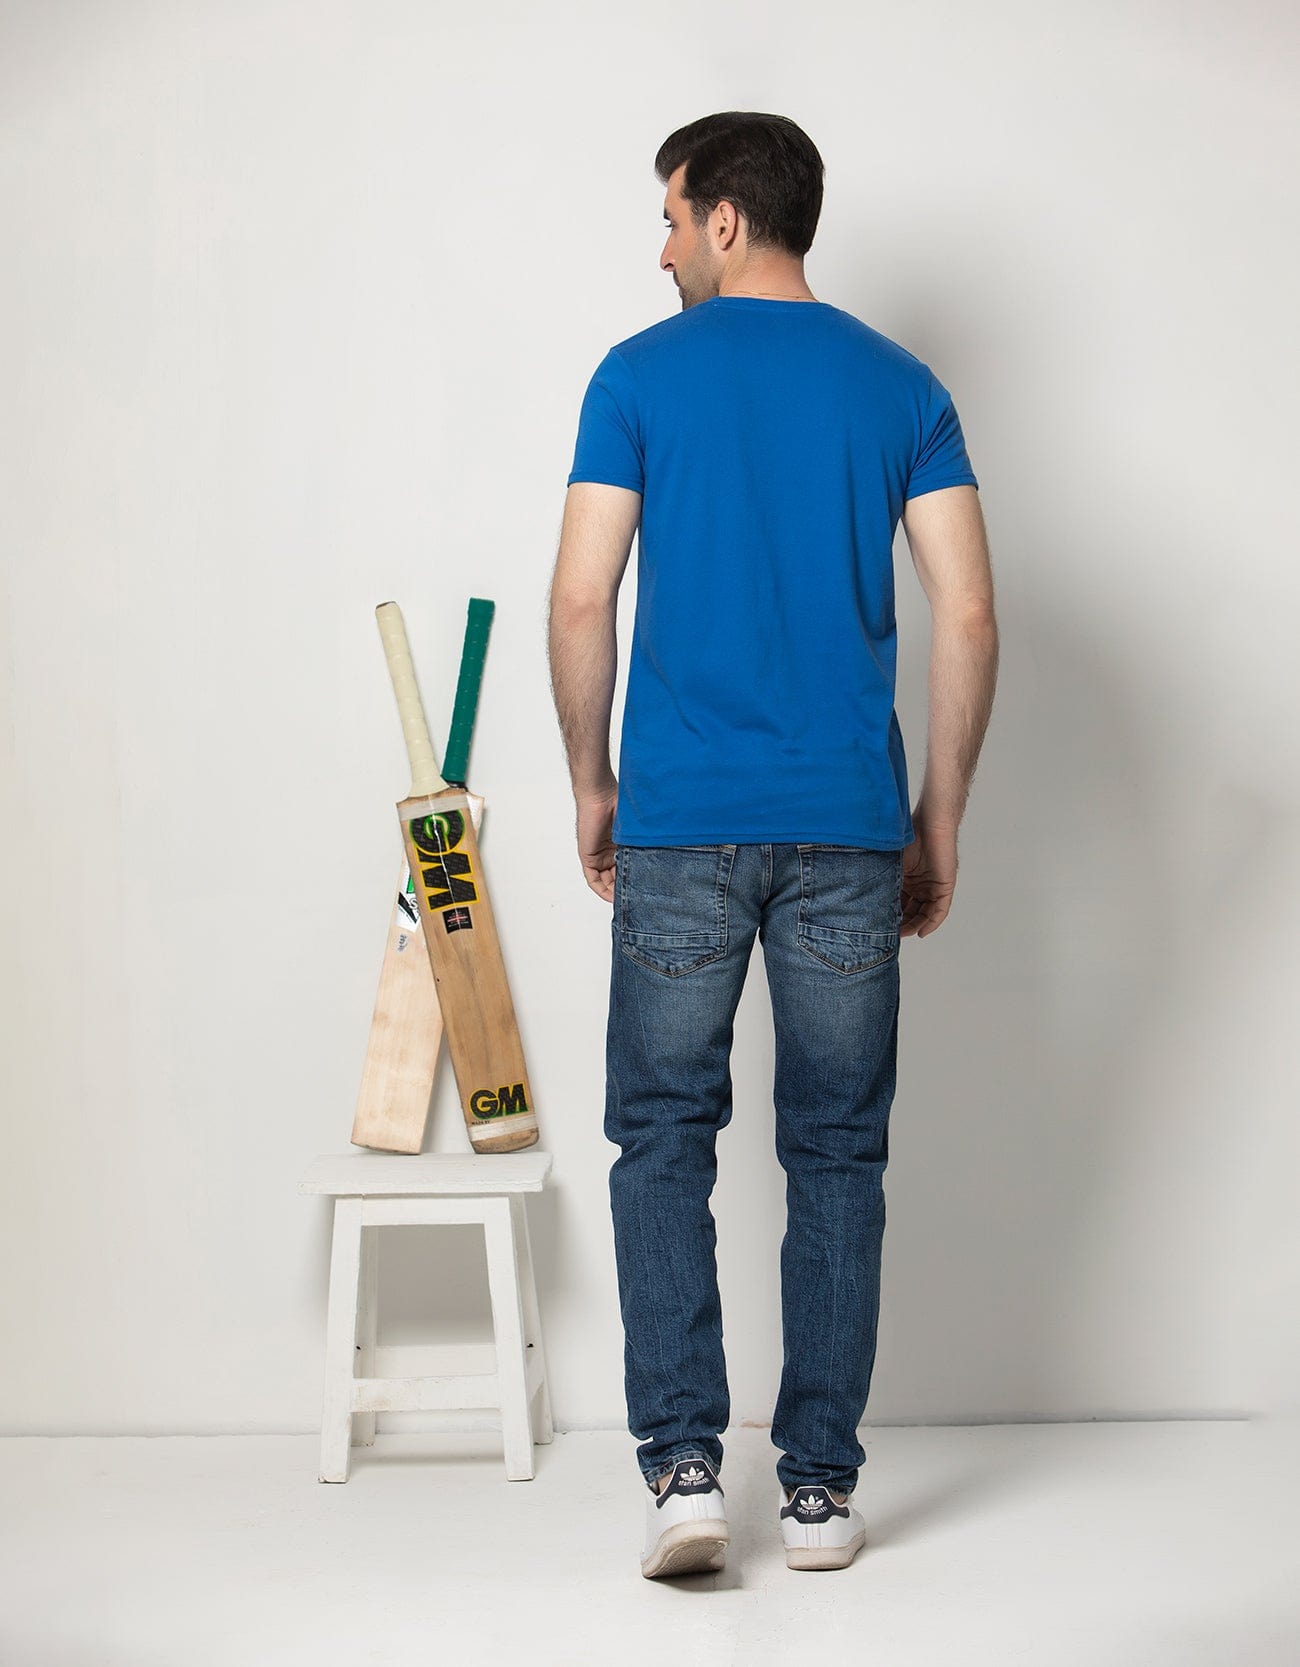 T-SHIRT - Blue T-SHIRTS HMKTS20036 - HOPE NOT OUT by Shahid Afridi